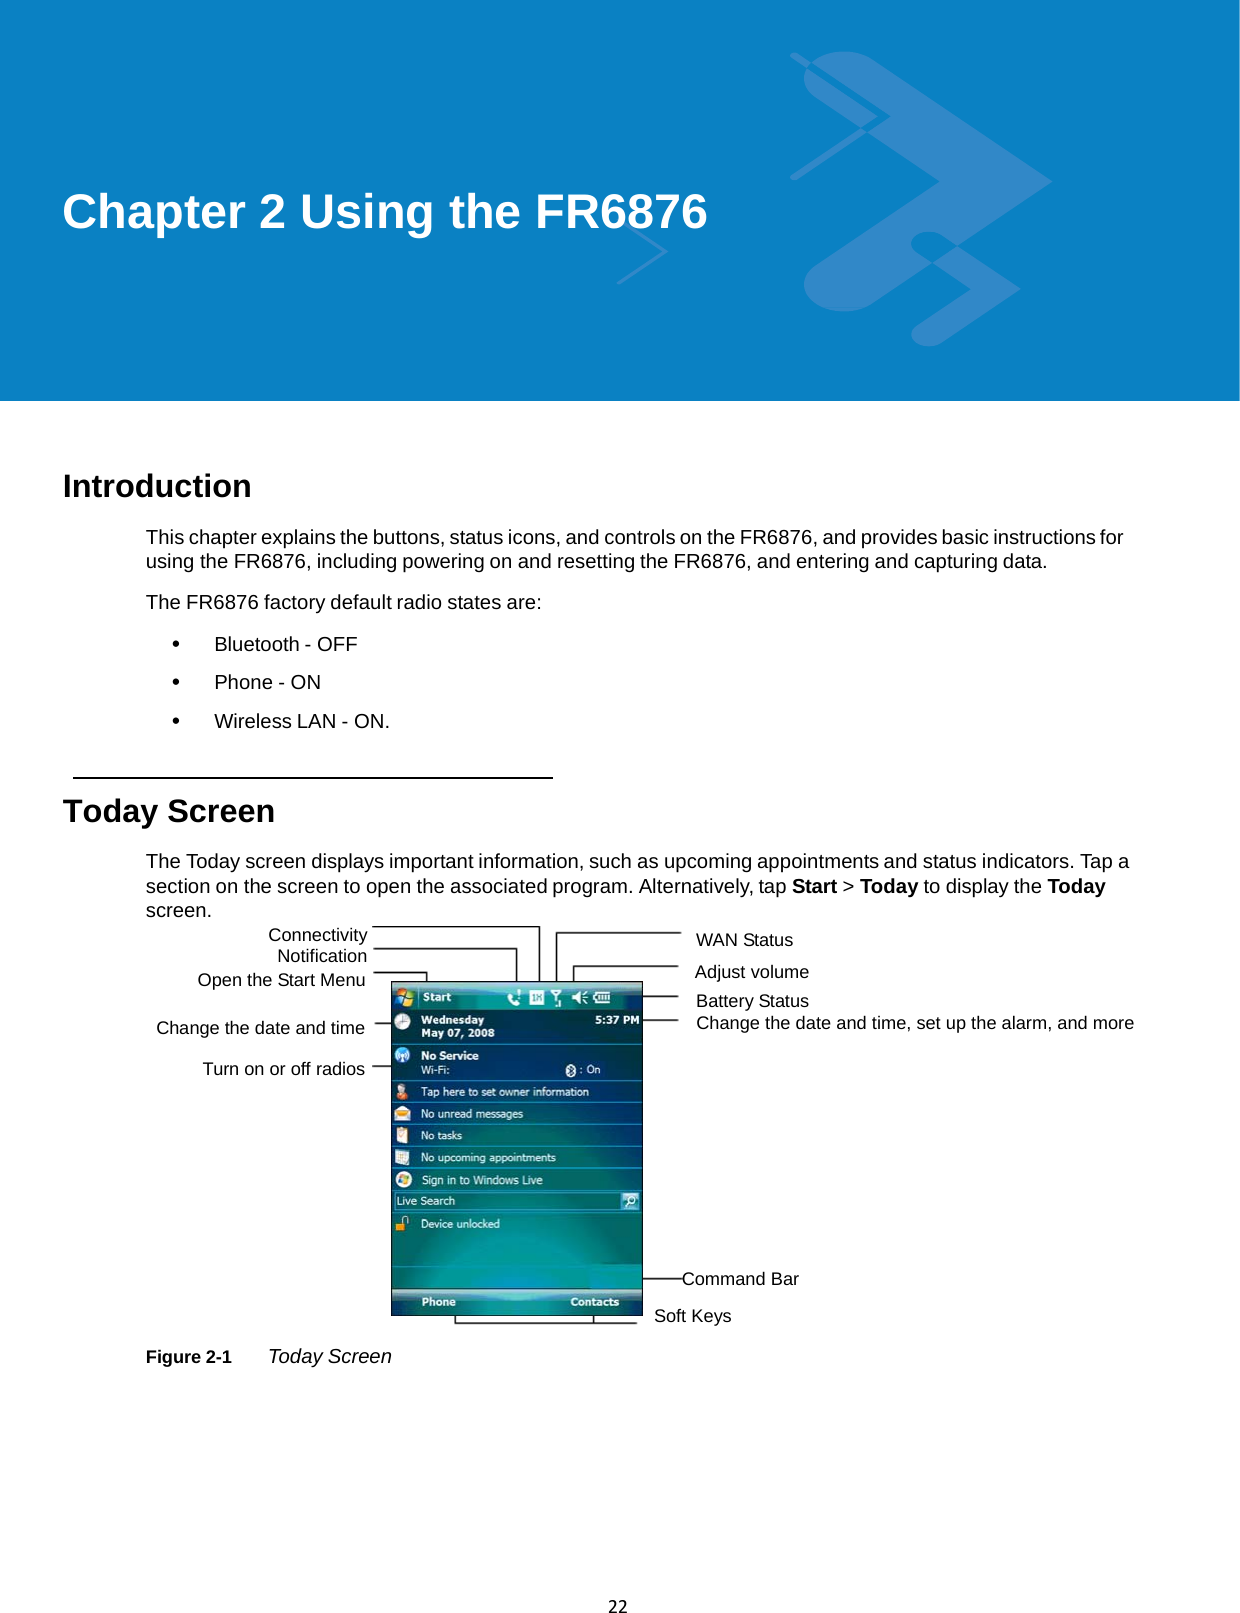  22Chapter 2 Using the FR6876          Introduction  This chapter explains the buttons, status icons, and controls on the FR6876, and provides basic instructions for using the FR6876, including powering on and resetting the FR6876, and entering and capturing data.  The FR6876 factory default radio states are:  •   Bluetooth - OFF  •   Phone - ON  •   Wireless LAN - ON.    Today Screen  The Today screen displays important information, such as upcoming appointments and status indicators. Tap a section on the screen to open the associated program. Alternatively, tap Start &gt; Today to display the Today screen. Connectivity Notification WAN Status Open the Start Menu  Adjust volume Battery Status Change the date and time Change the date and time, set up the alarm, and more  Turn on or off radios                                                                                                           Command Bar  Soft Keys  Figure 2-1      Today Screen